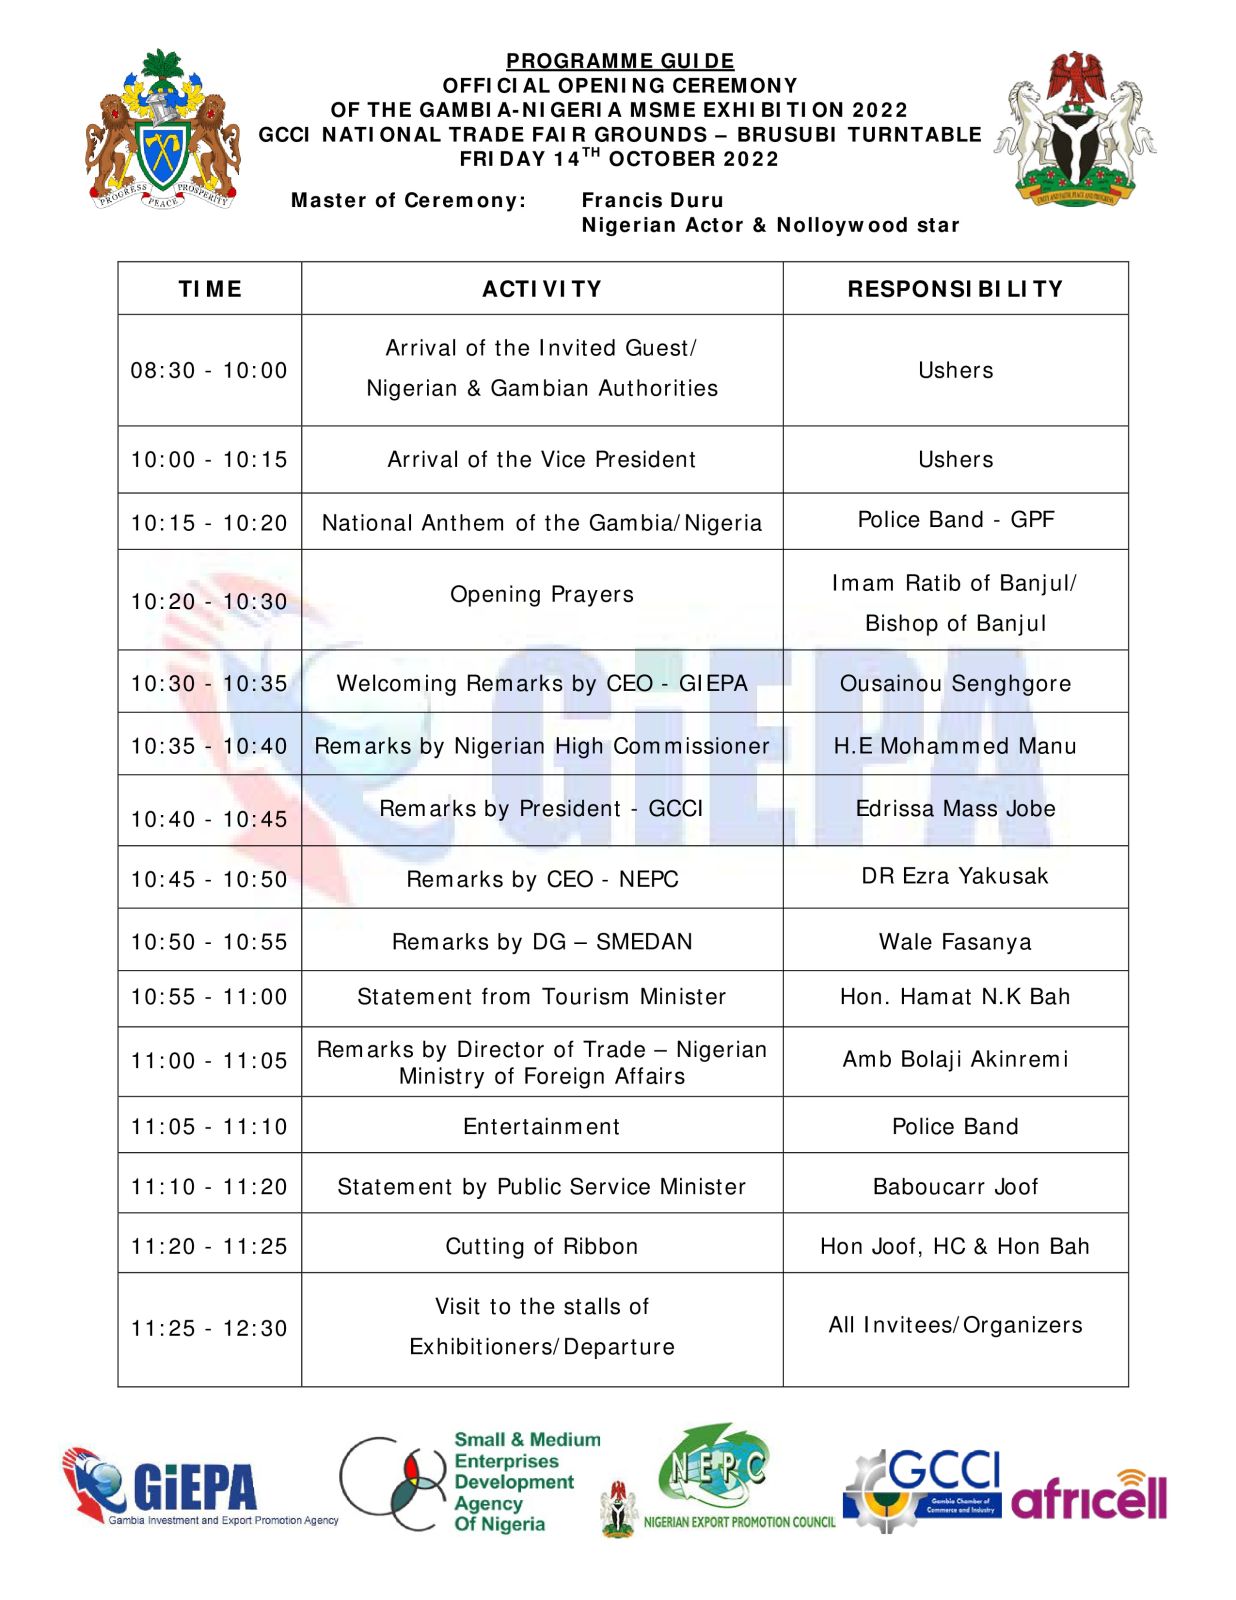 Program Guide For The Official Opening Of The Gambia - Nigeria MSME Exhibition 2022 Photo